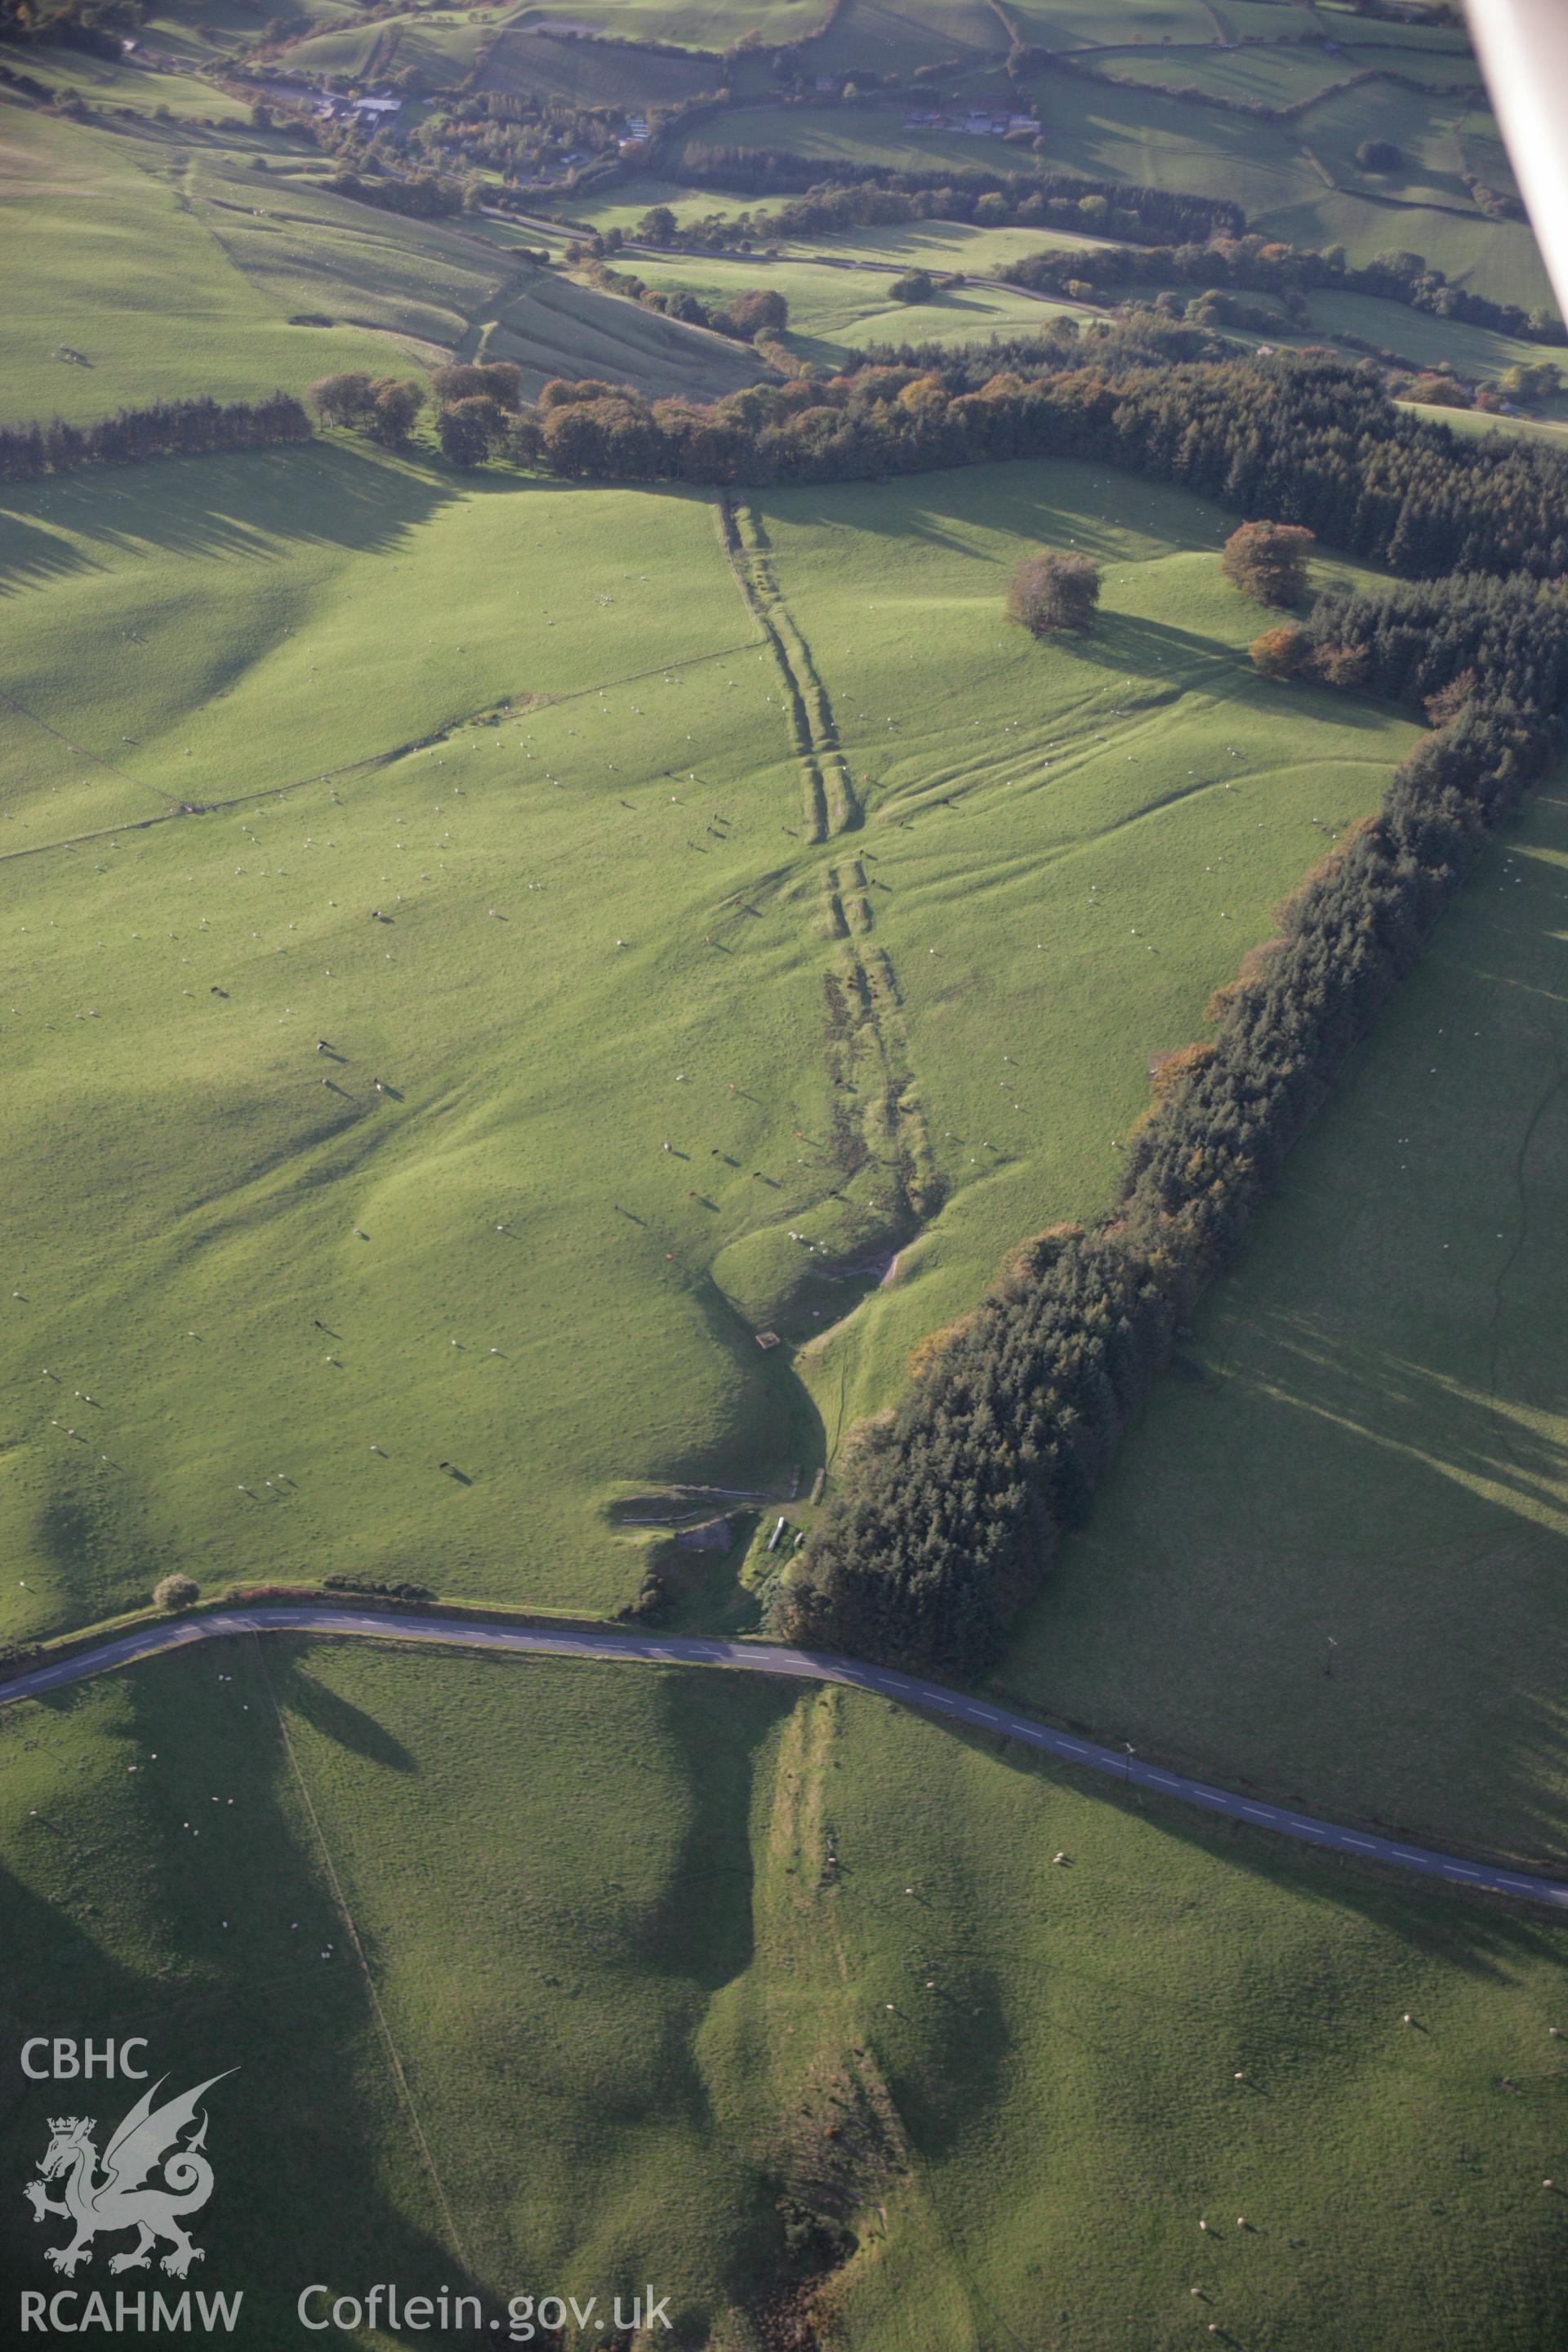 RCAHMW colour oblique aerial photograph of Crugyn Bank Dyke looking north-west. Taken on 13 October 2005 by Toby Driver